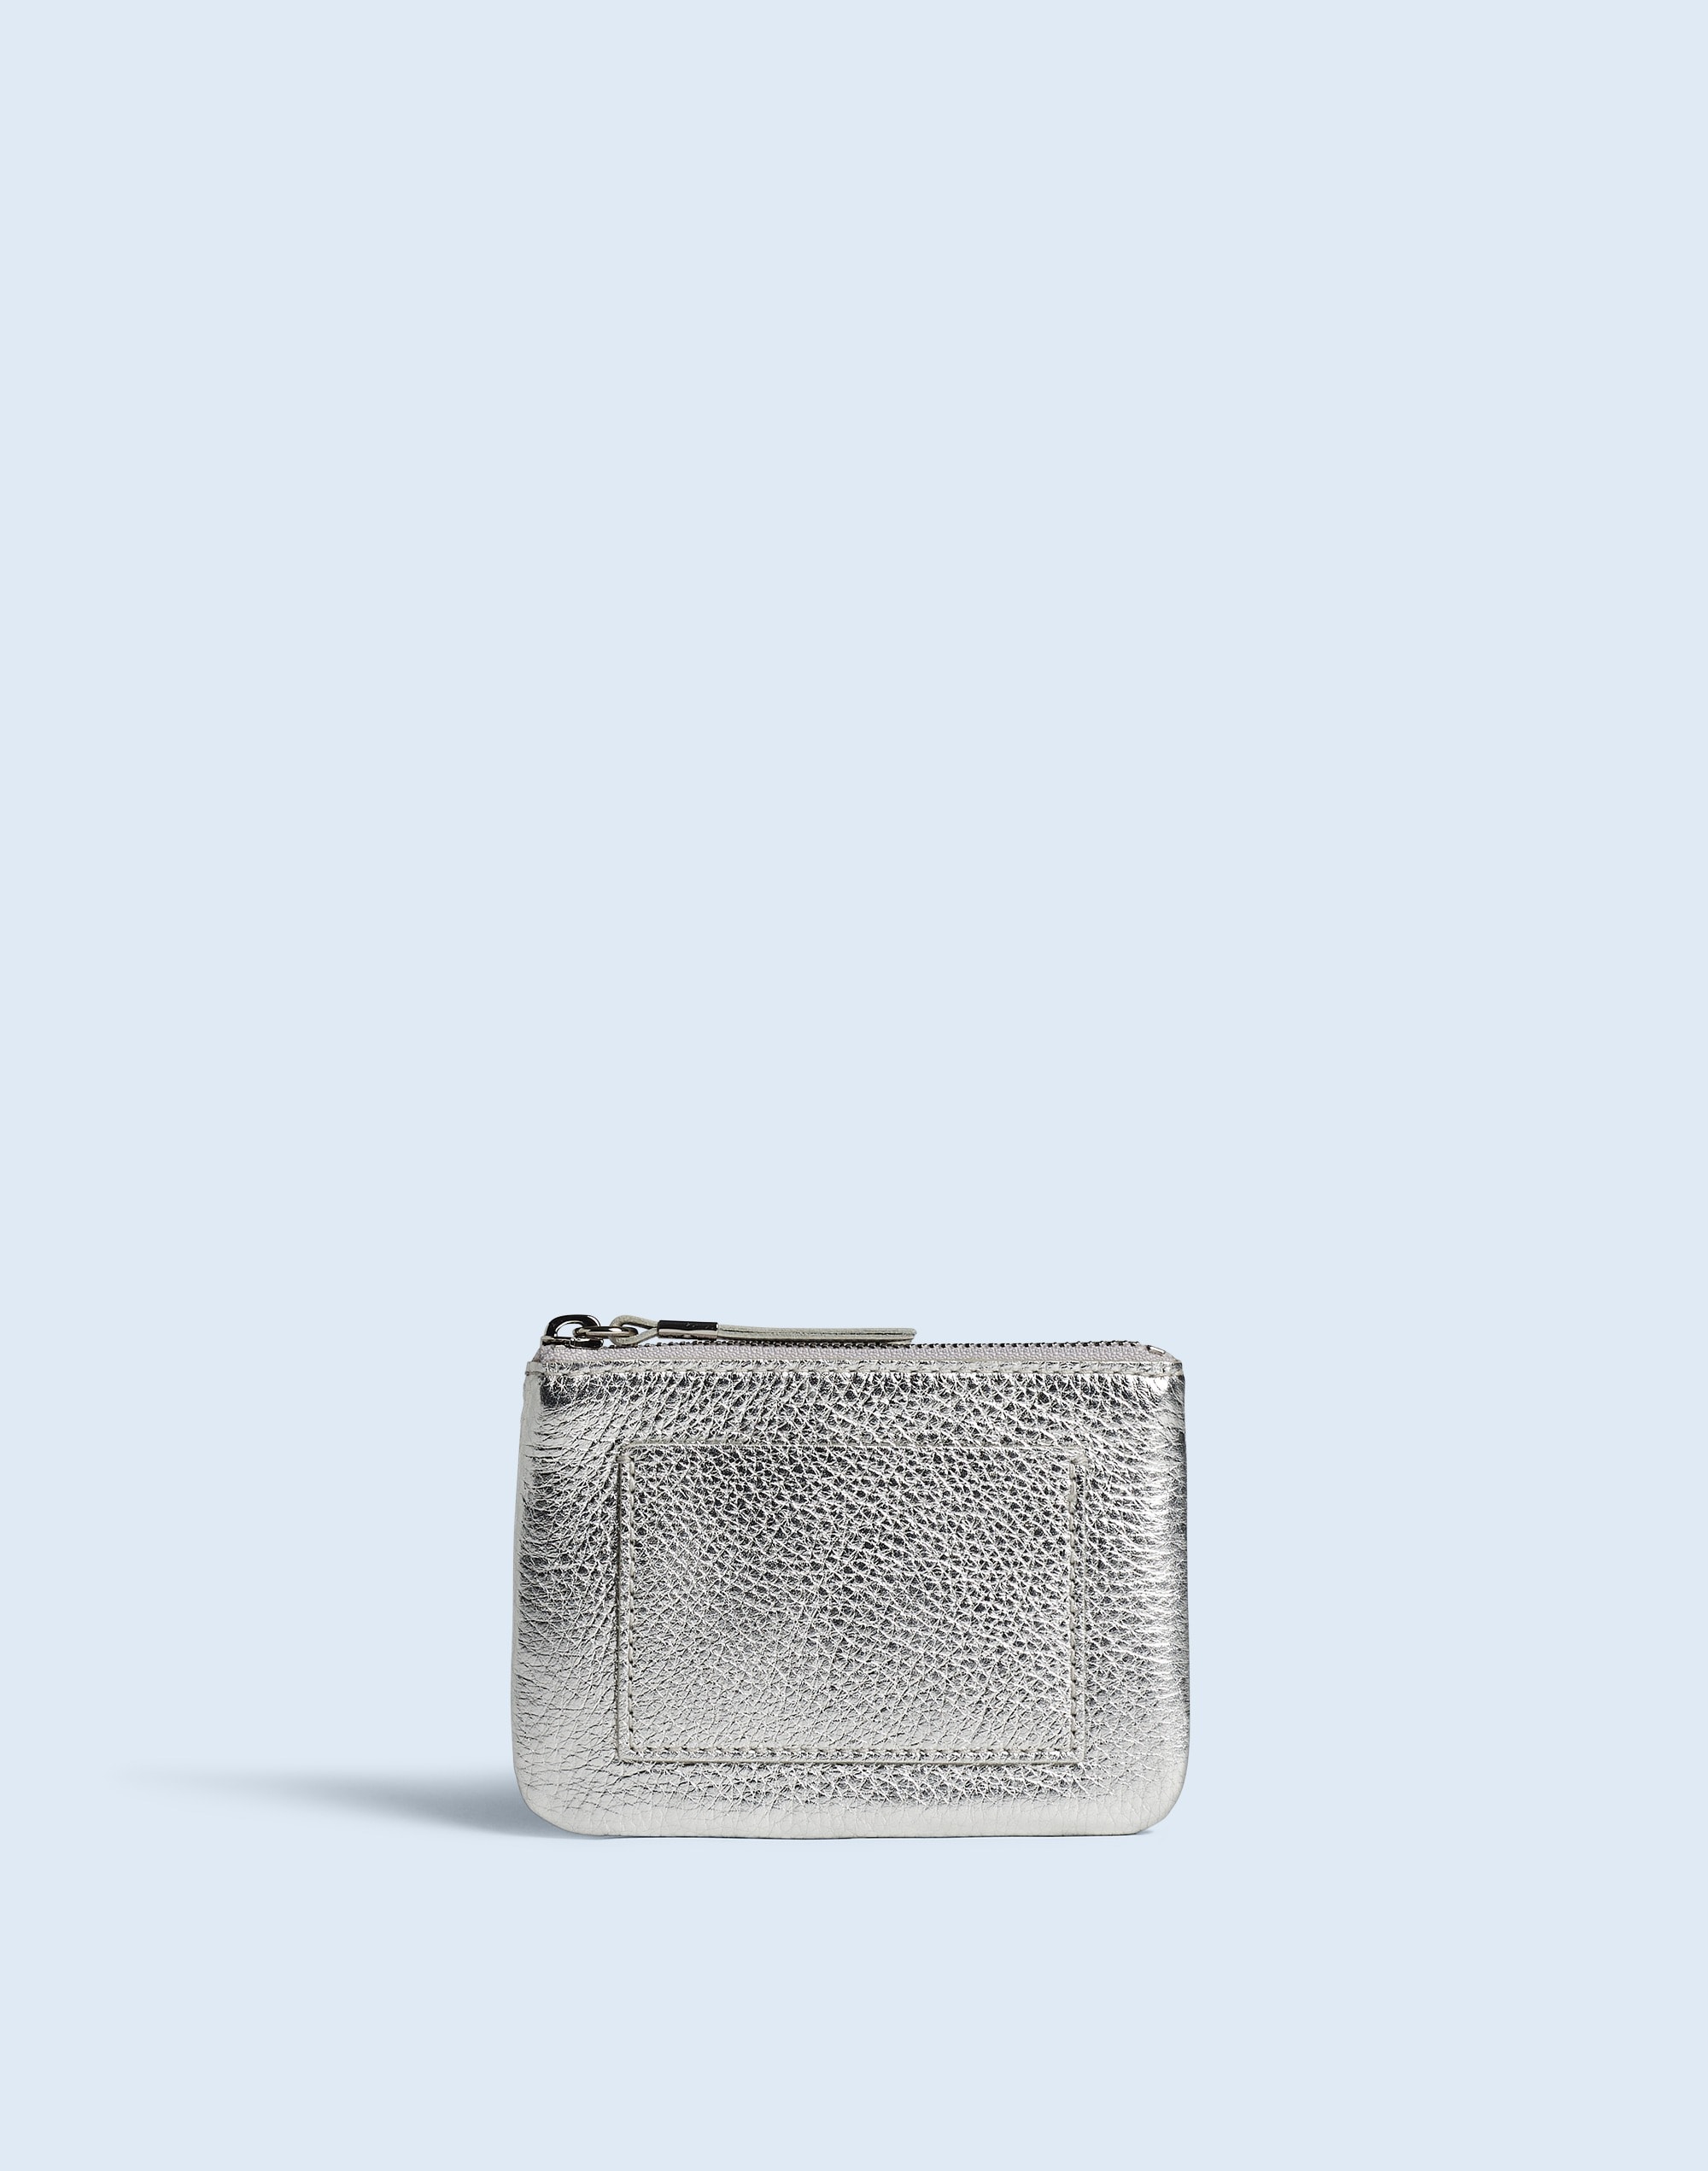 Mw The Small Travel Zip Pouch In Silver Metallic